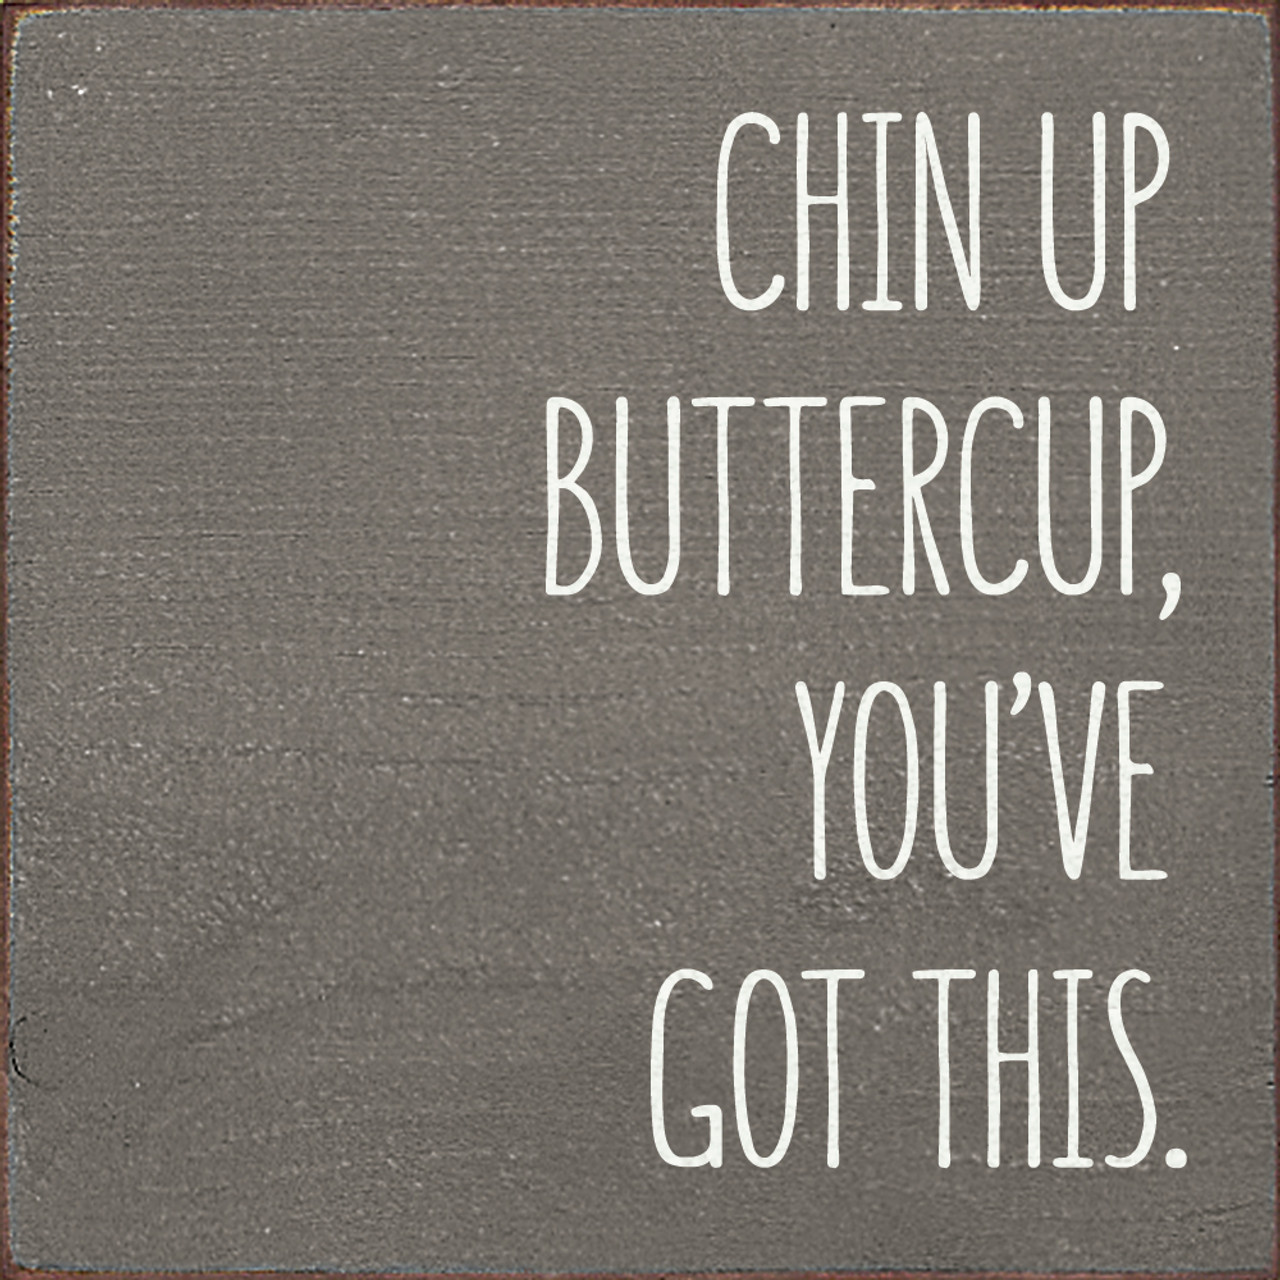 Chin Up Buttercup, You've Got This.